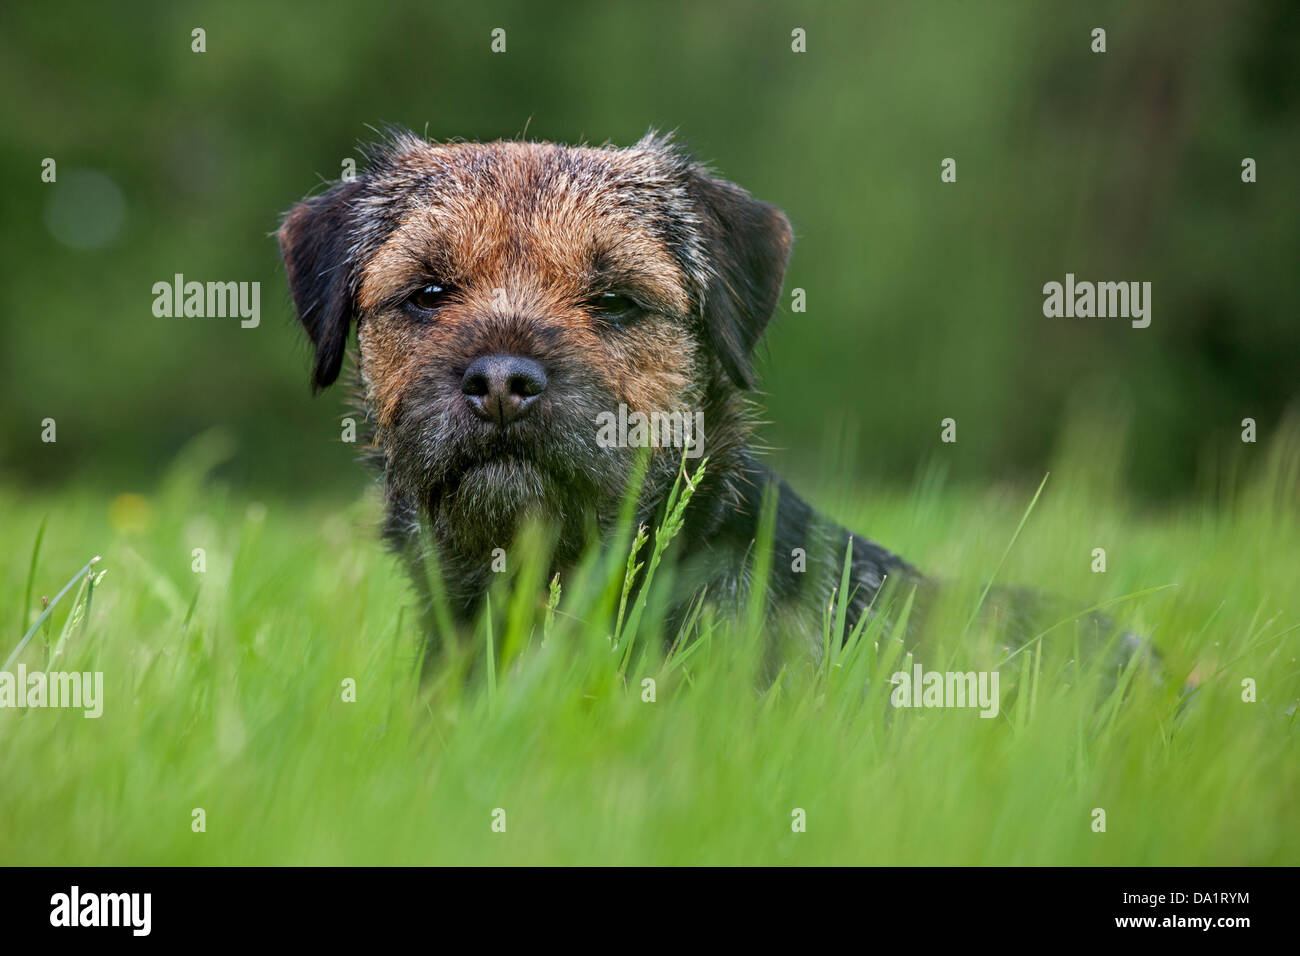 Border Terrier (Canis lupus familiaris) dog lying in meadow Banque D'Images